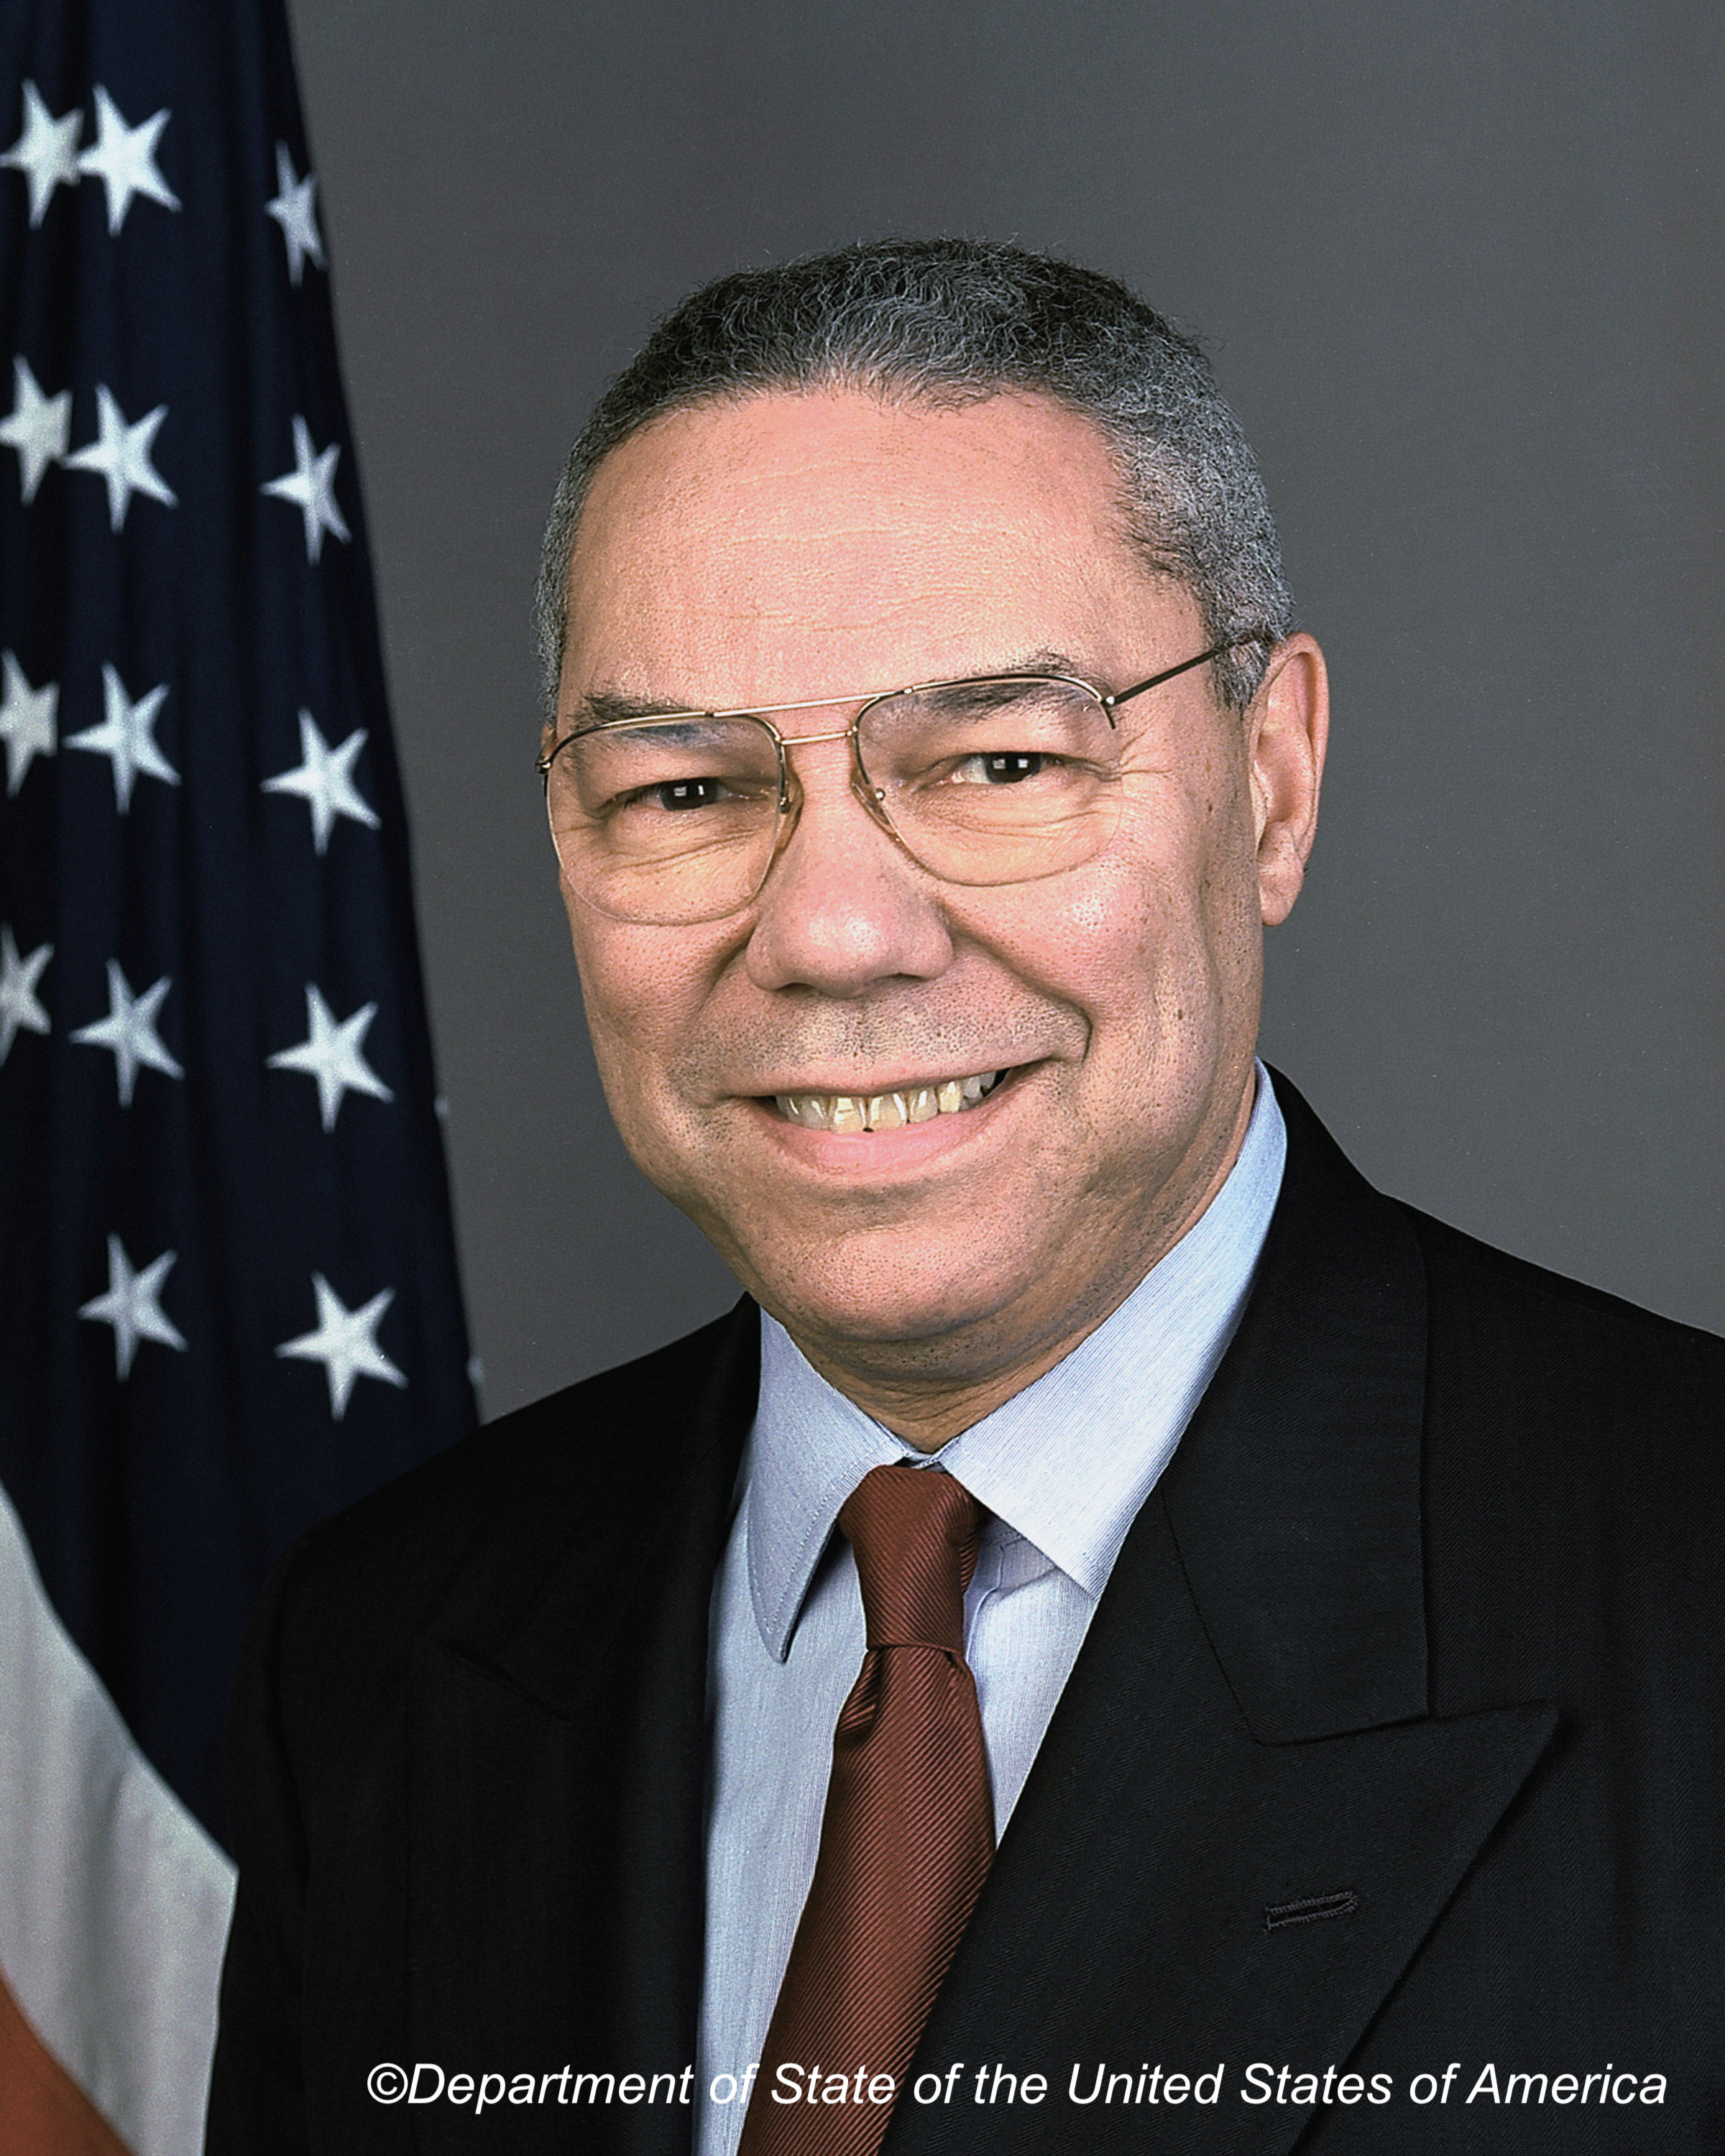 Colin Powell, 84, Dies from Covid-19 Complications